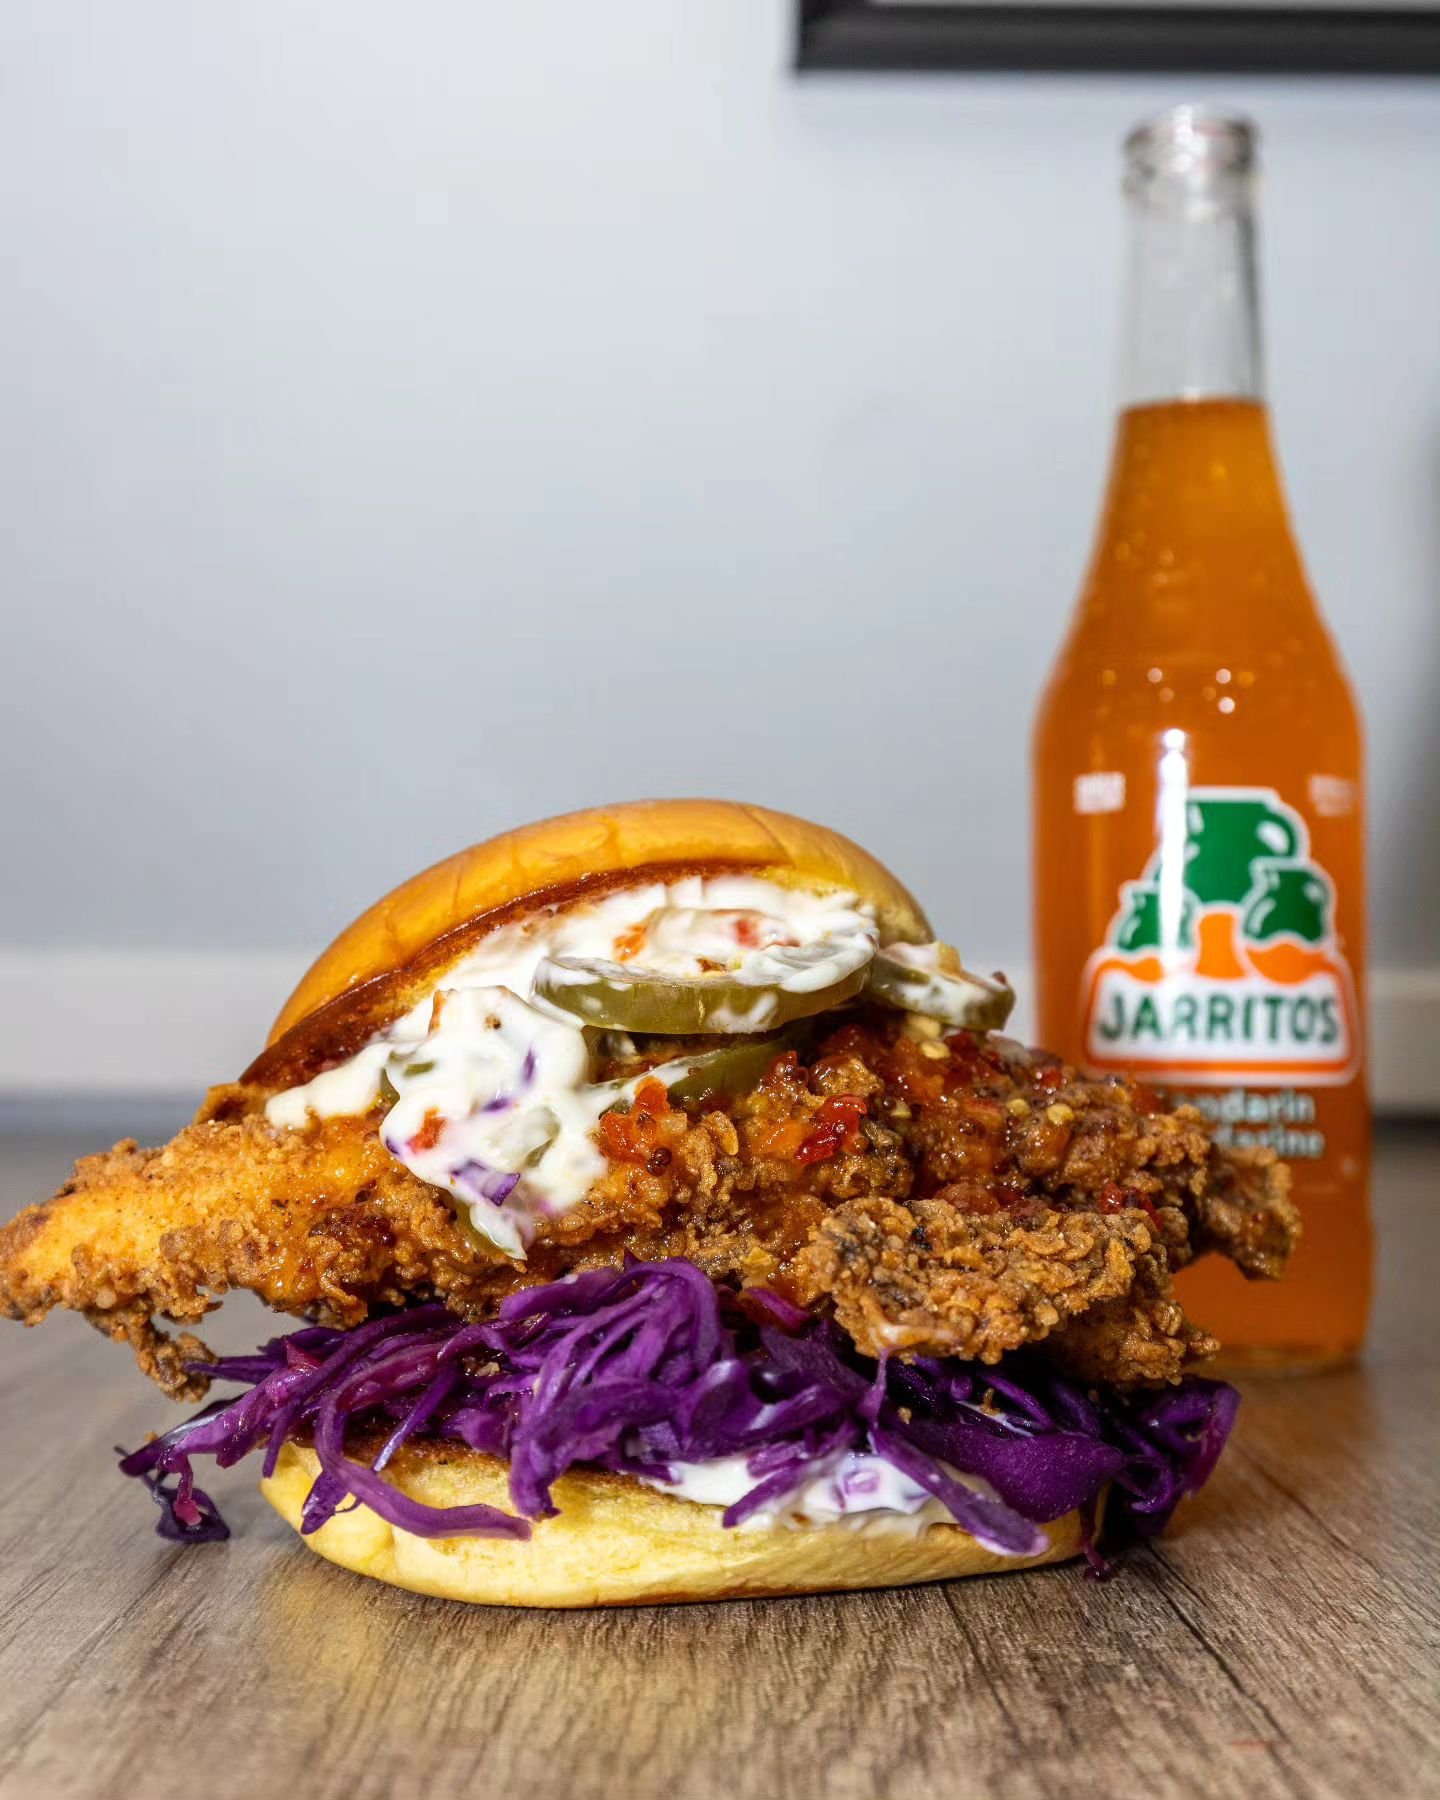 SWEET MUSTARD CHILI CHICKEN 

Buttermilk fried chicken breast, cabbage slaw, pickled jalape&ntilde;os, garlic aioli, sweet mustard chili sauce, toasted potato bun 

JABS is here to annouce that we will be taking part of &ldquo;Off-Menu Food Crawl&rdq